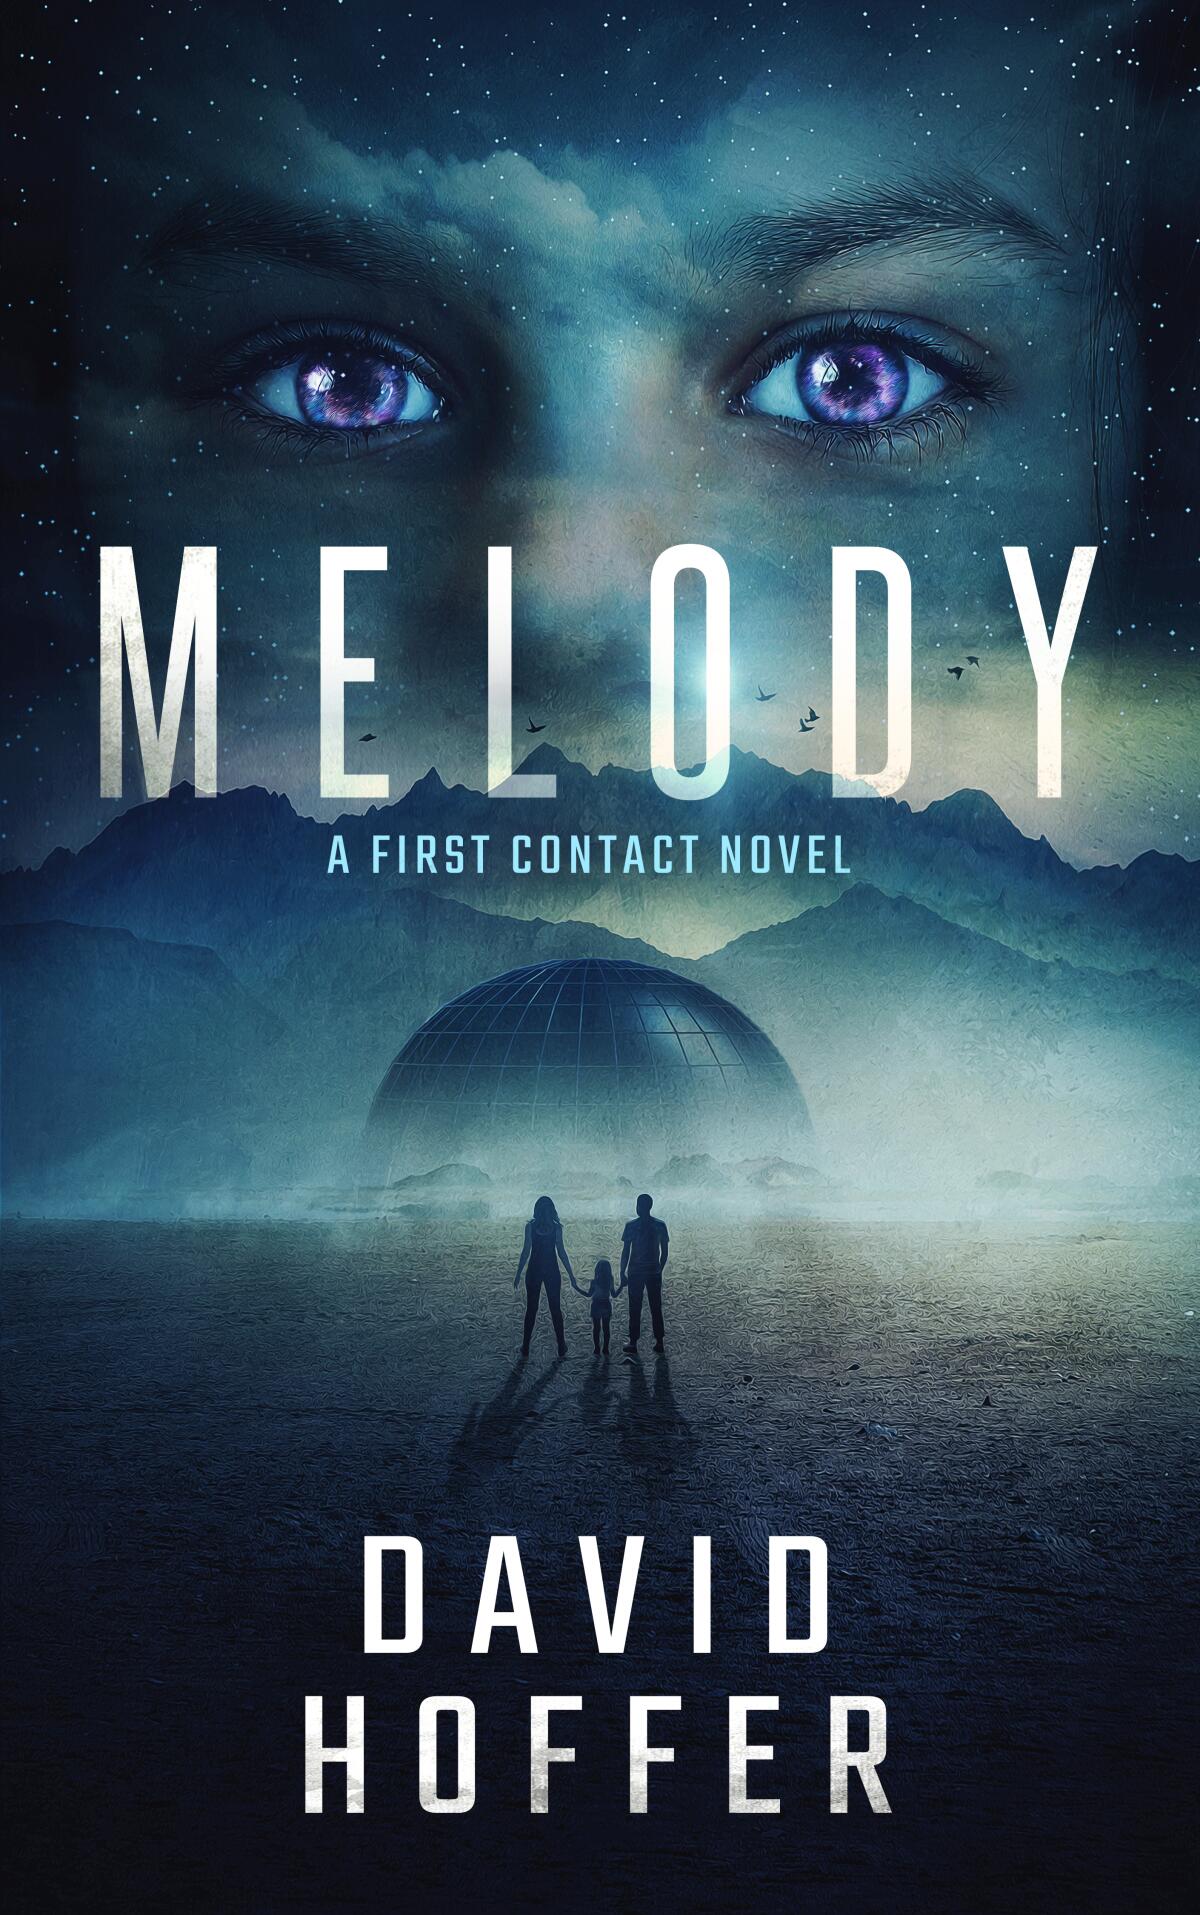 "Melody" book cover